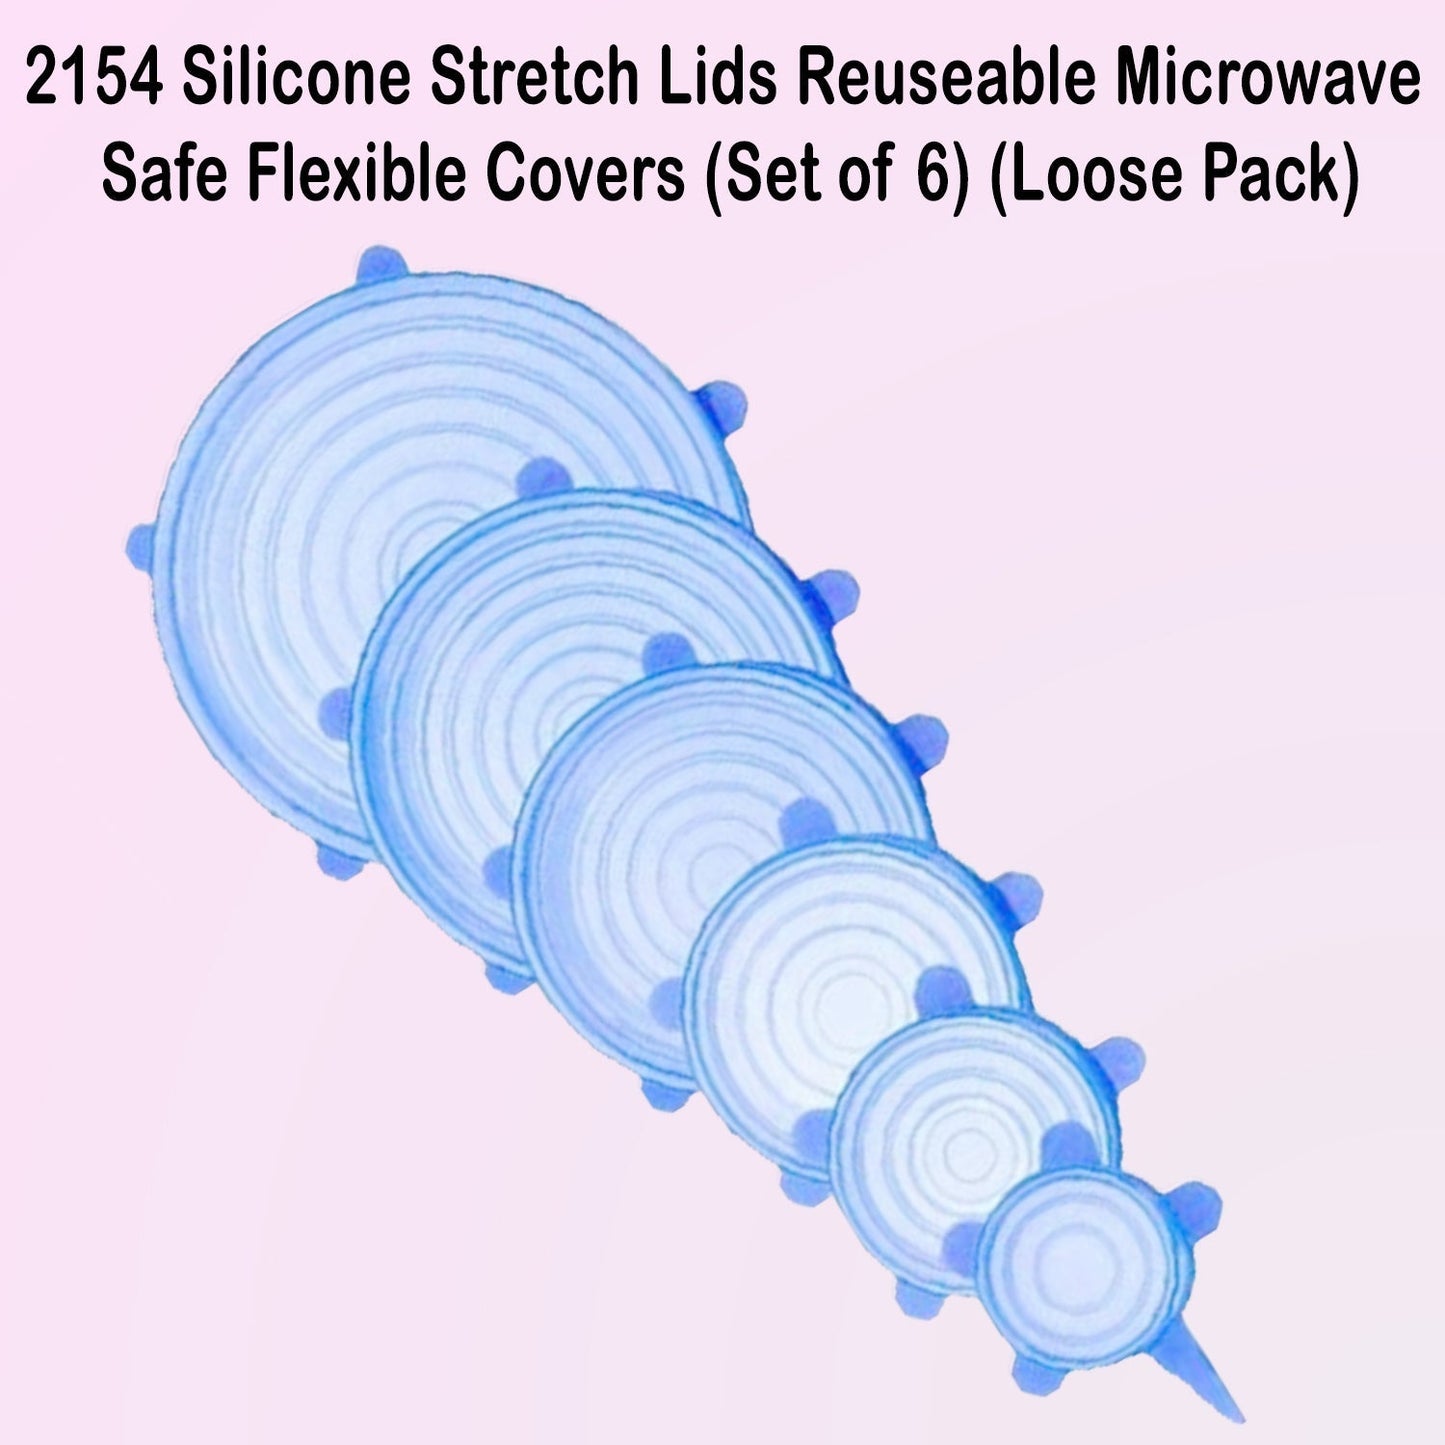 2154 Silicone Stretch Lids Reuseable Microwave Safe Flexible Covers (Set of 6) (Loose Pack) DeoDap